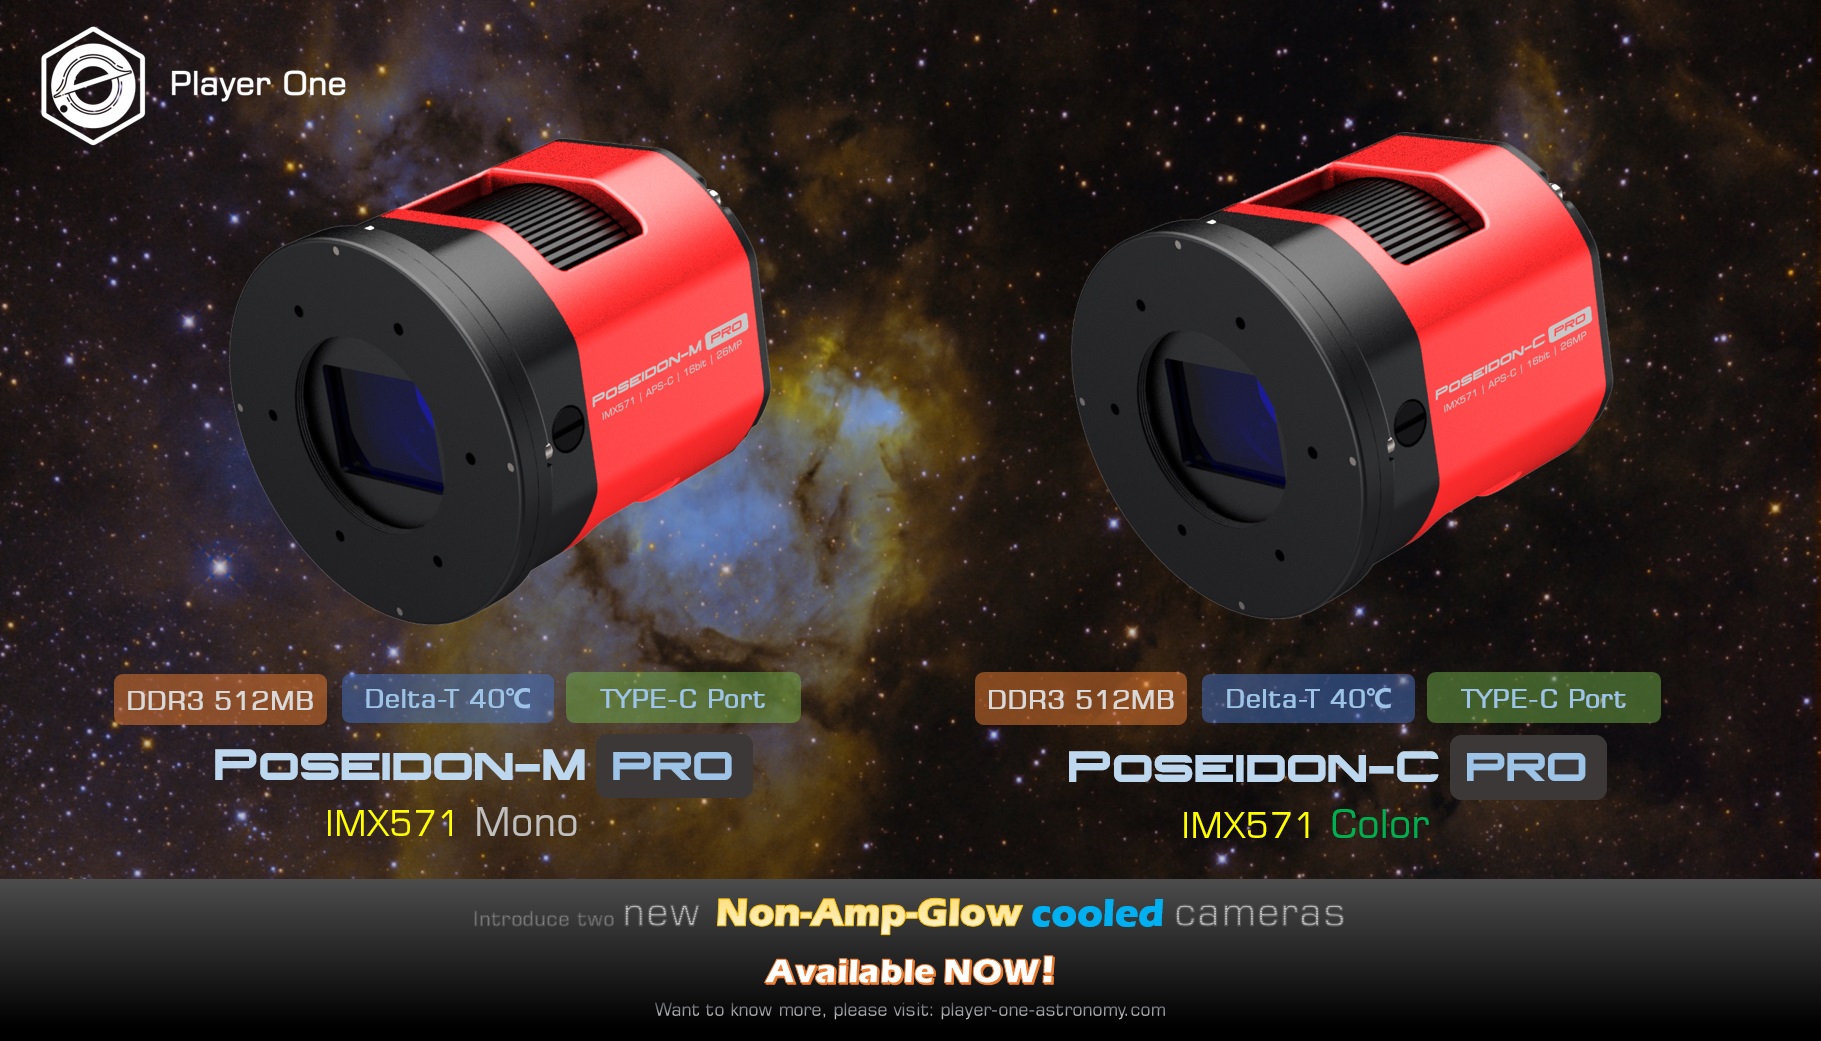 Poseidon cameras start shipping from this week!!